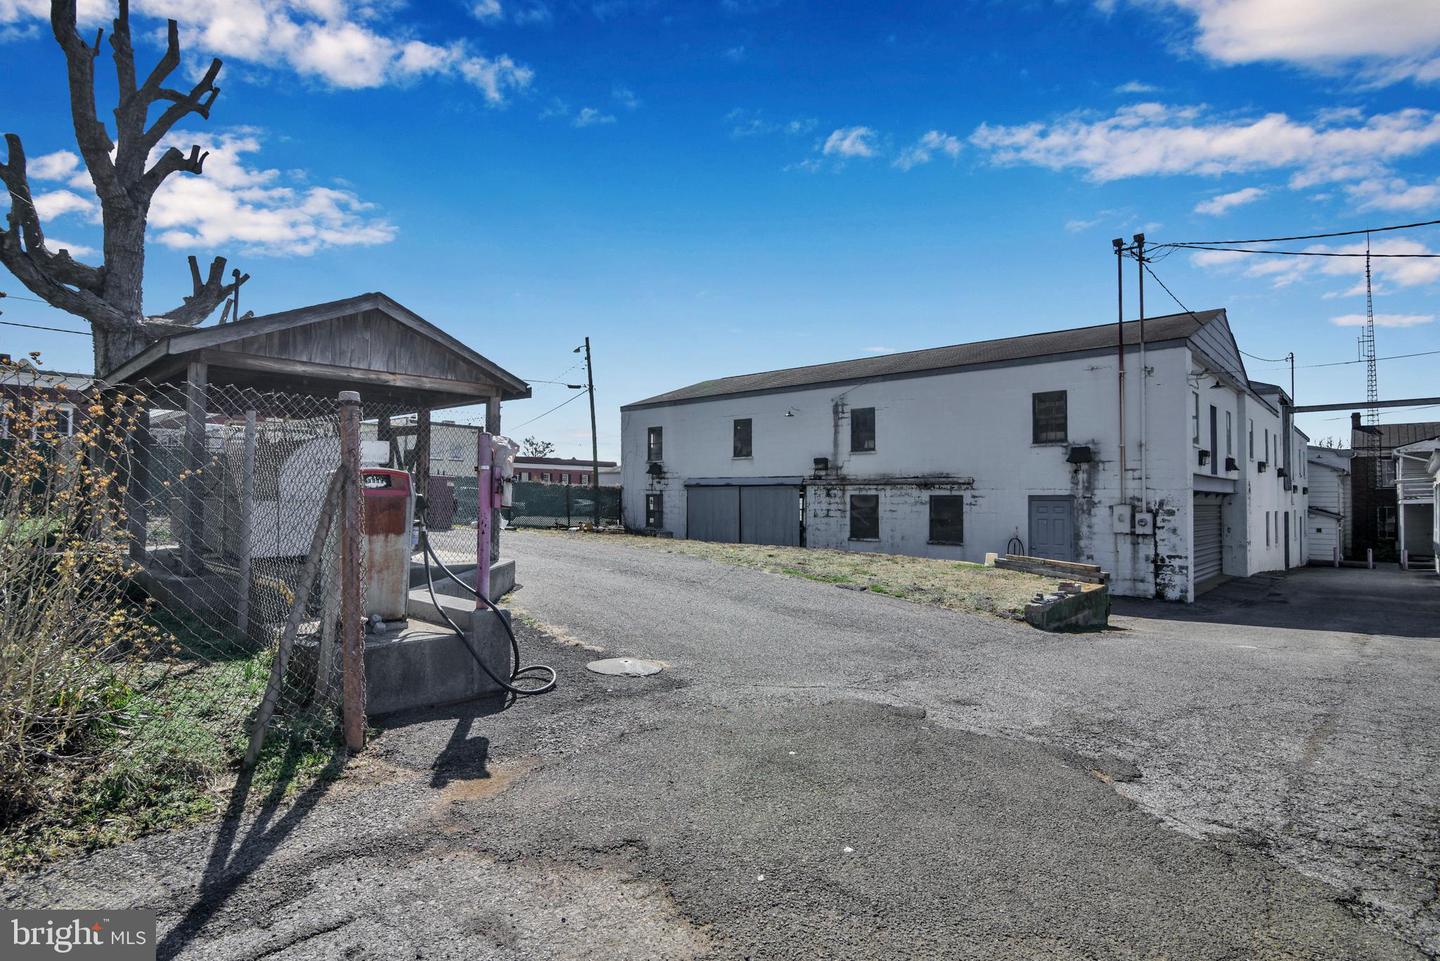 28 MAIN #30 MAIN 15 ACADEMY, BERRYVILLE, Virginia 22611, ,Land,For sale,28 MAIN #30 MAIN 15 ACADEMY,VACL2001674 MLS # VACL2001674